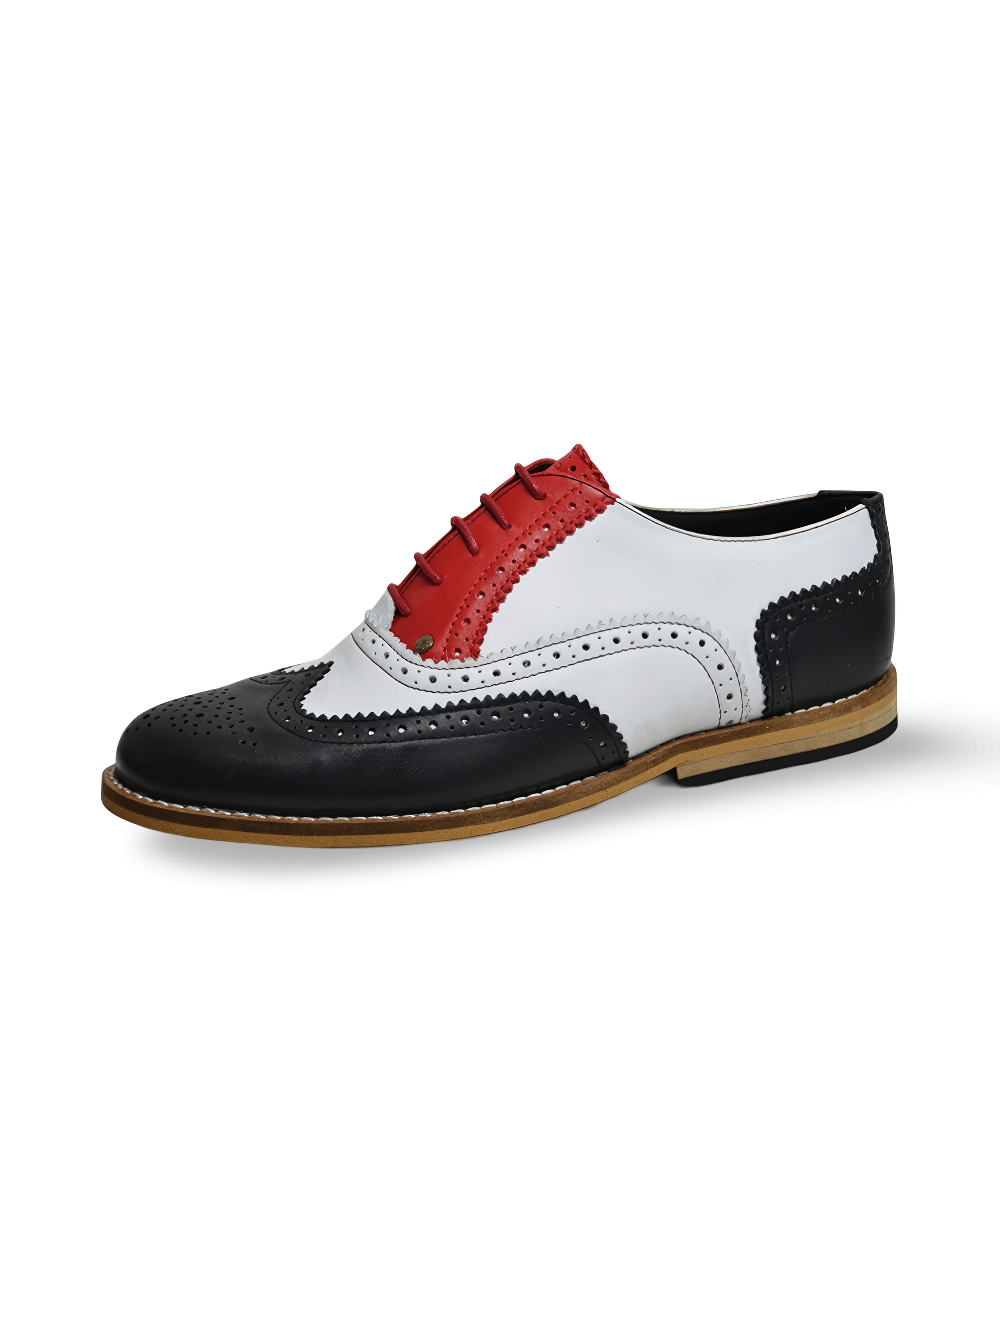 Stylish Black and White with Red Accent Oxford Shoes